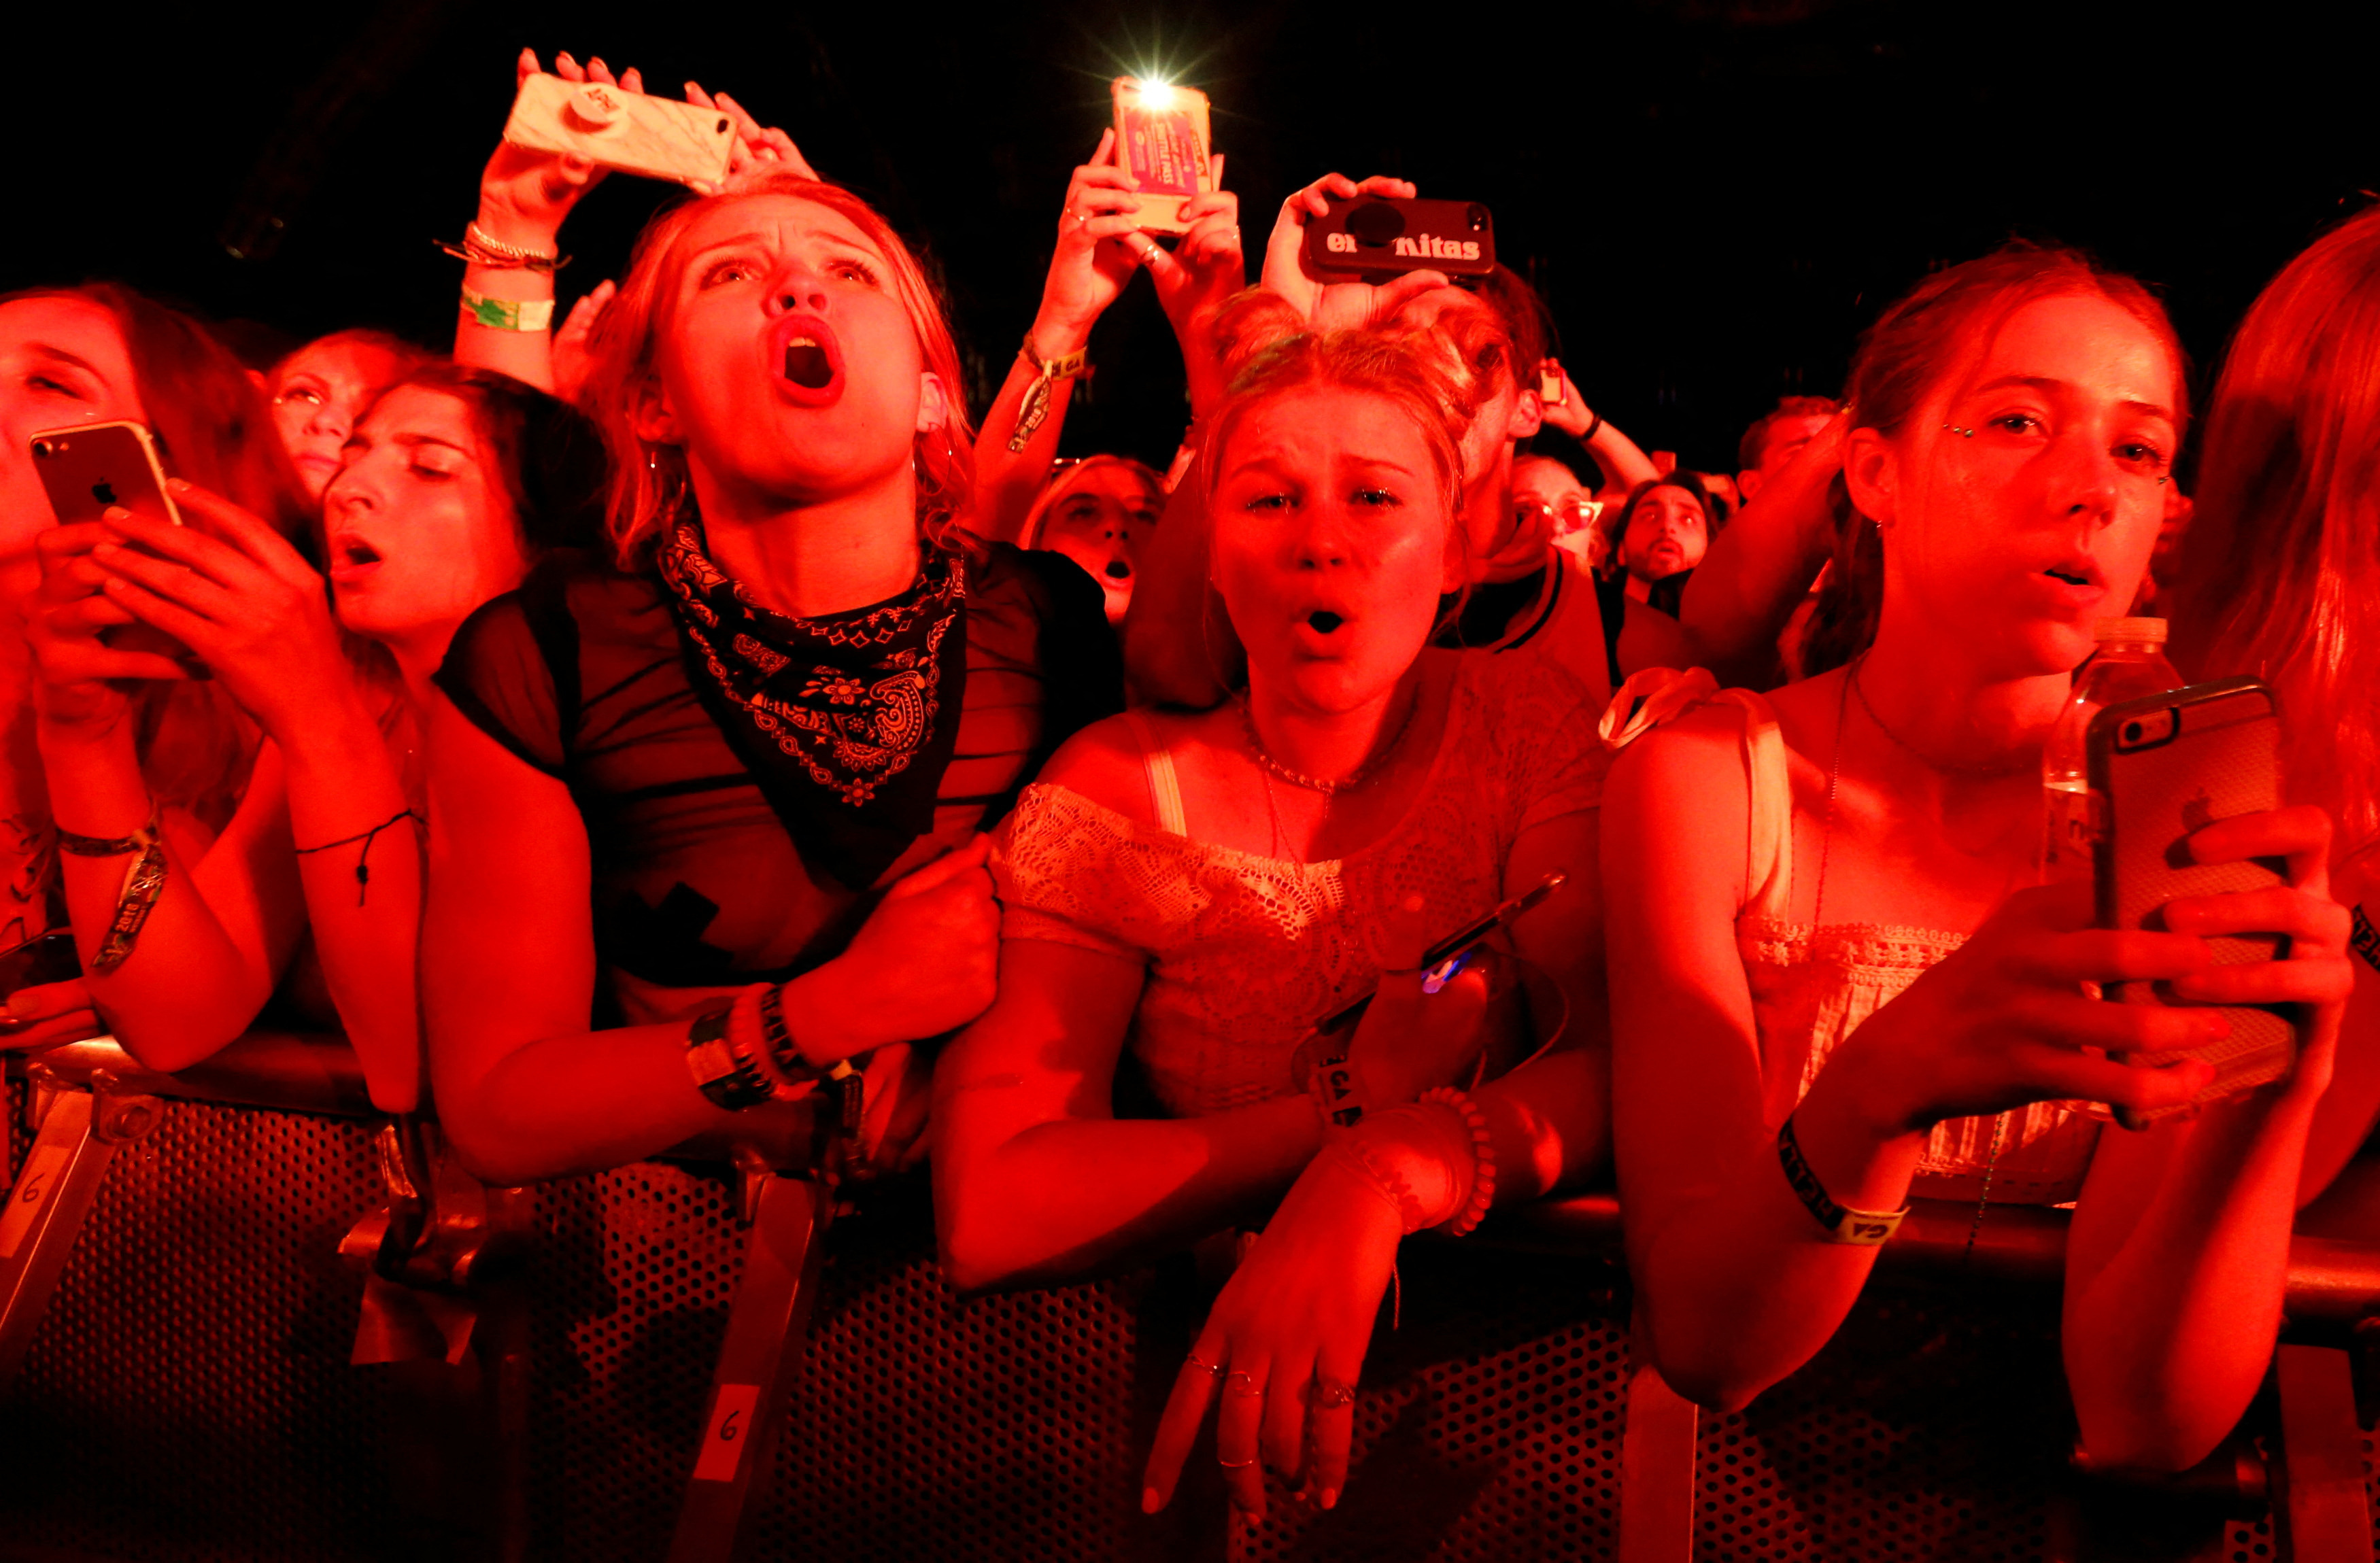 Concertgoers watch a performance by Post Malone at the Coachella Valley Music and Arts Festival in Indio